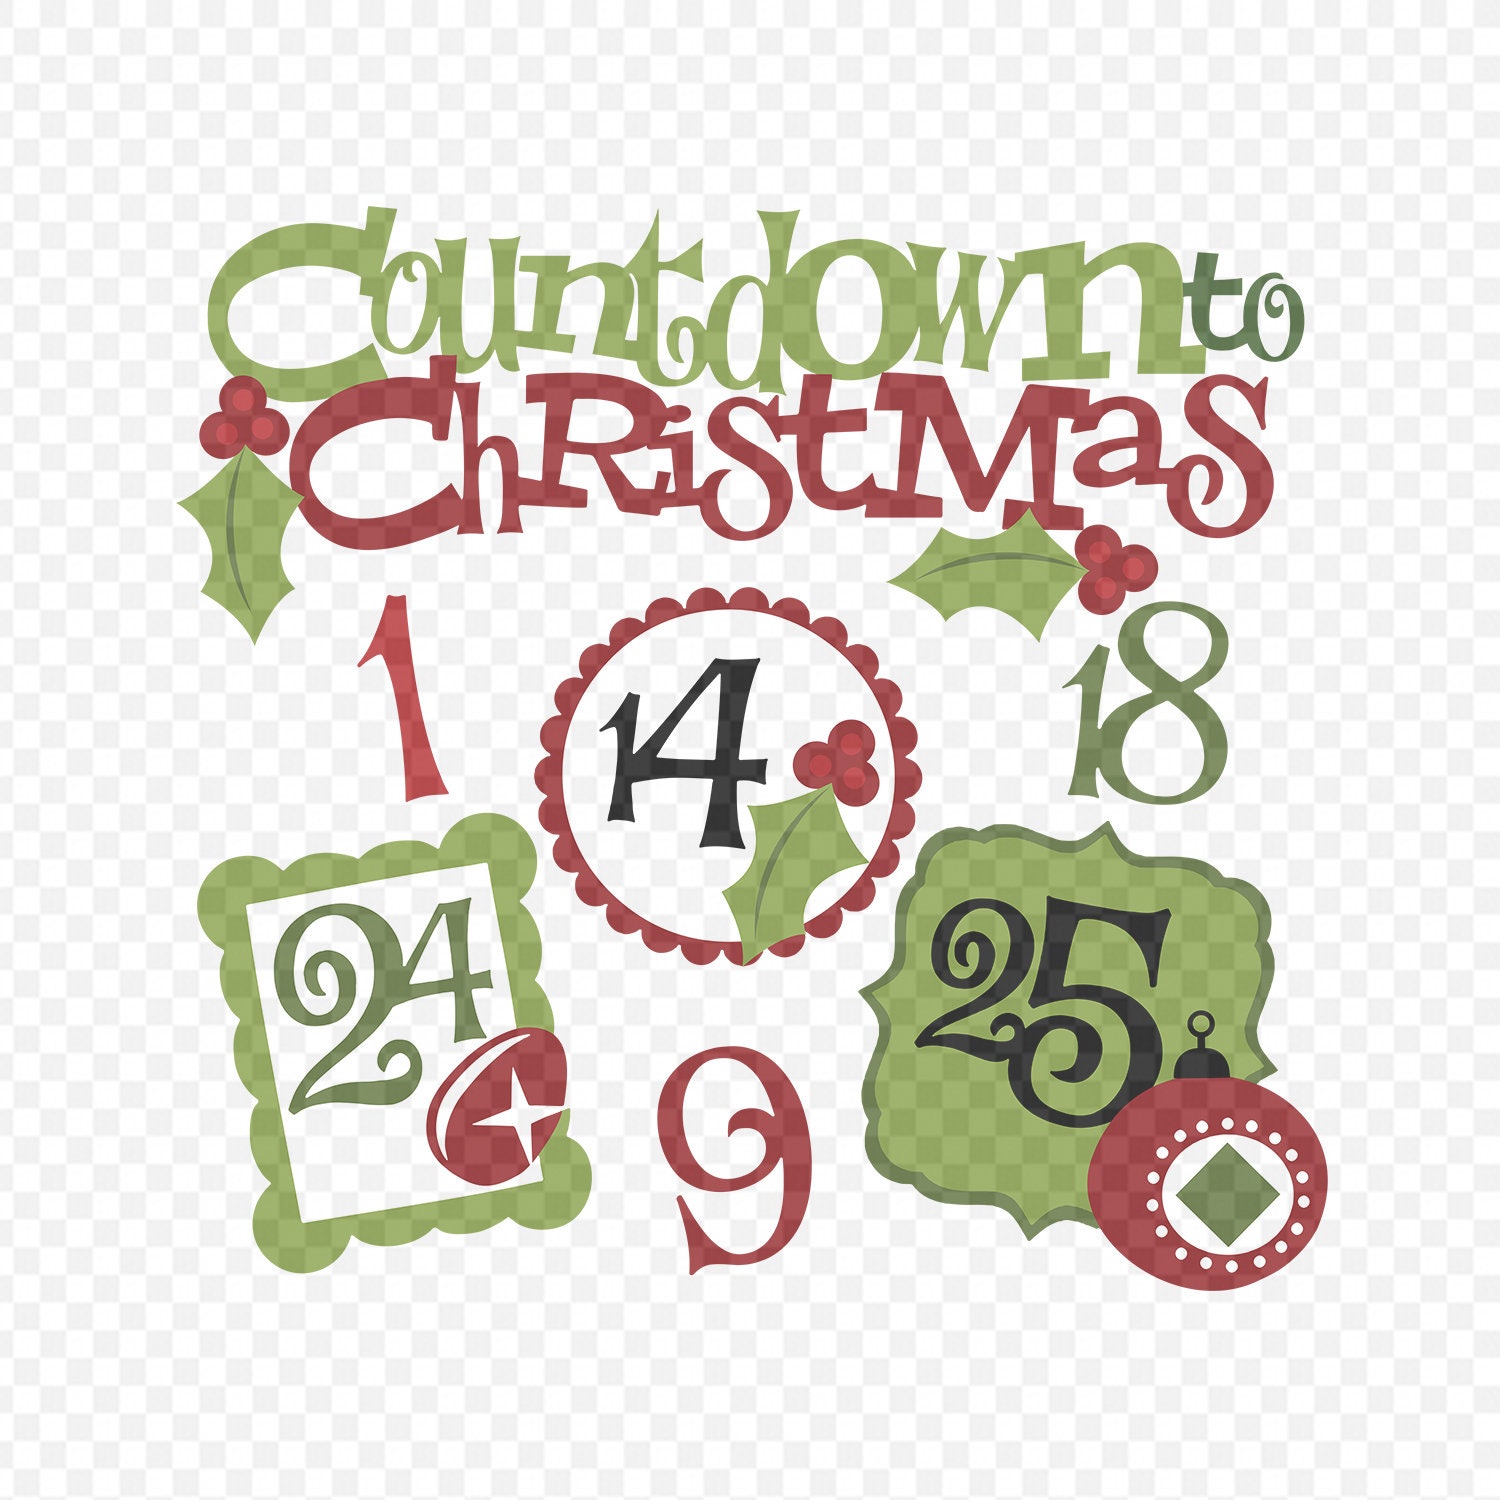 Download Christmas Countdown Number Svg Christmas Svg Merry ...